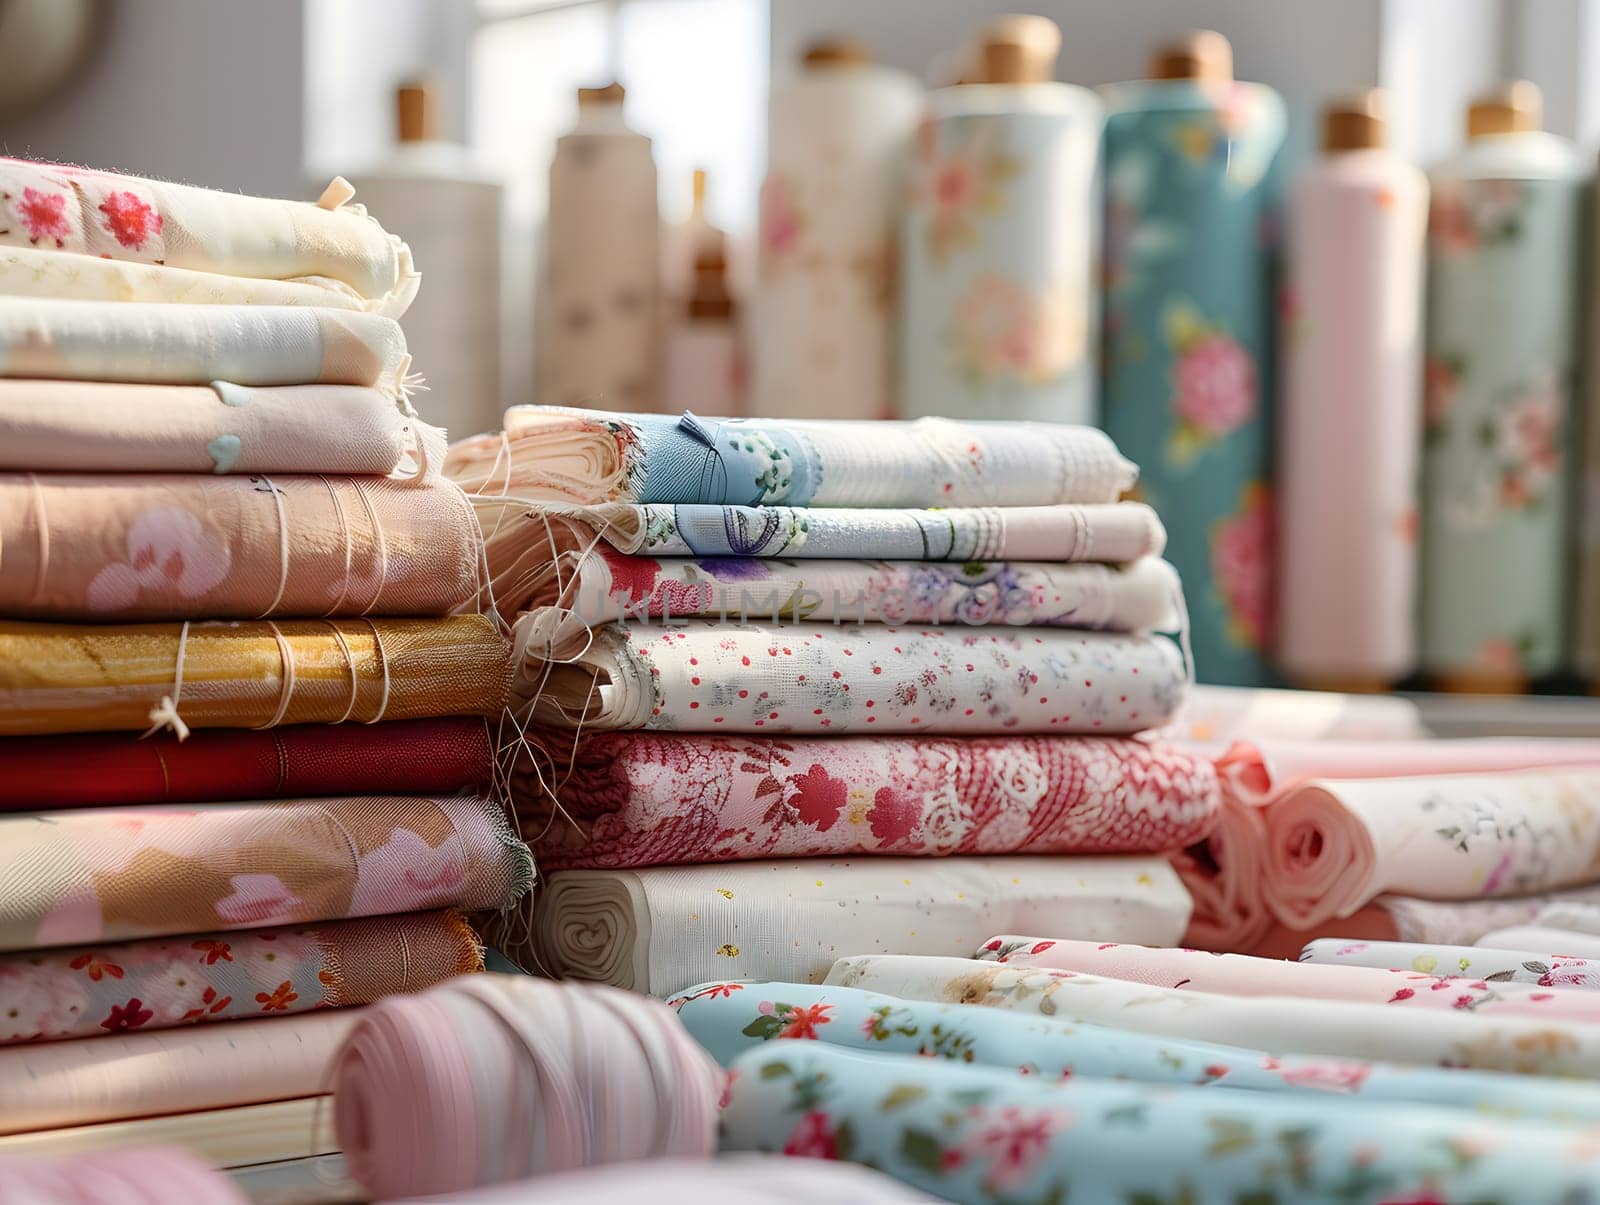 A variety of textile rolls in different shades of pink, magenta, and wood patterns are stacked in a room for a publication event showcasing the latest linen products